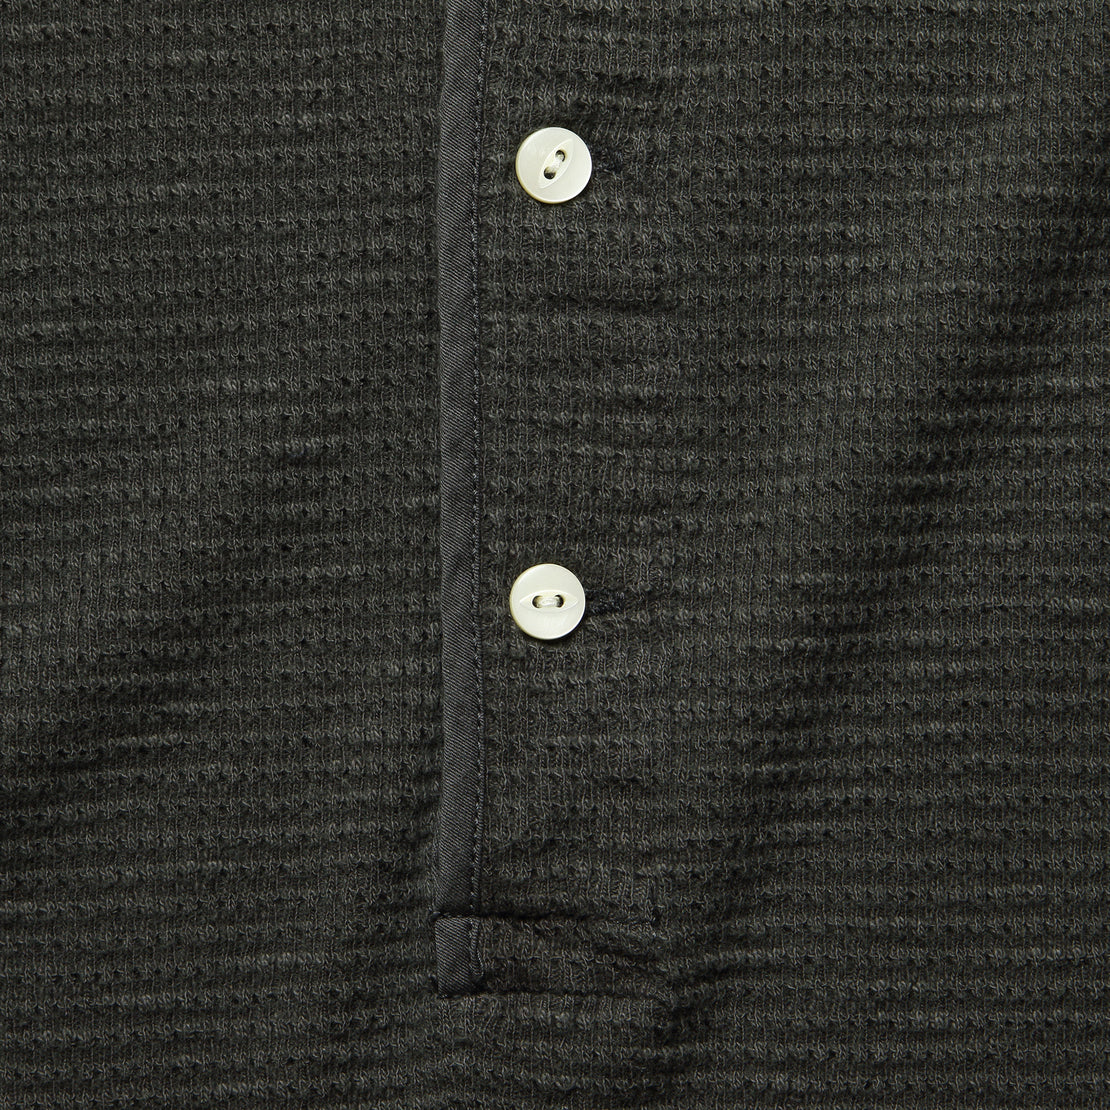 Waffle-Knit Henley - Faded Black - RRL - STAG Provisions - Tops - L/S Knit